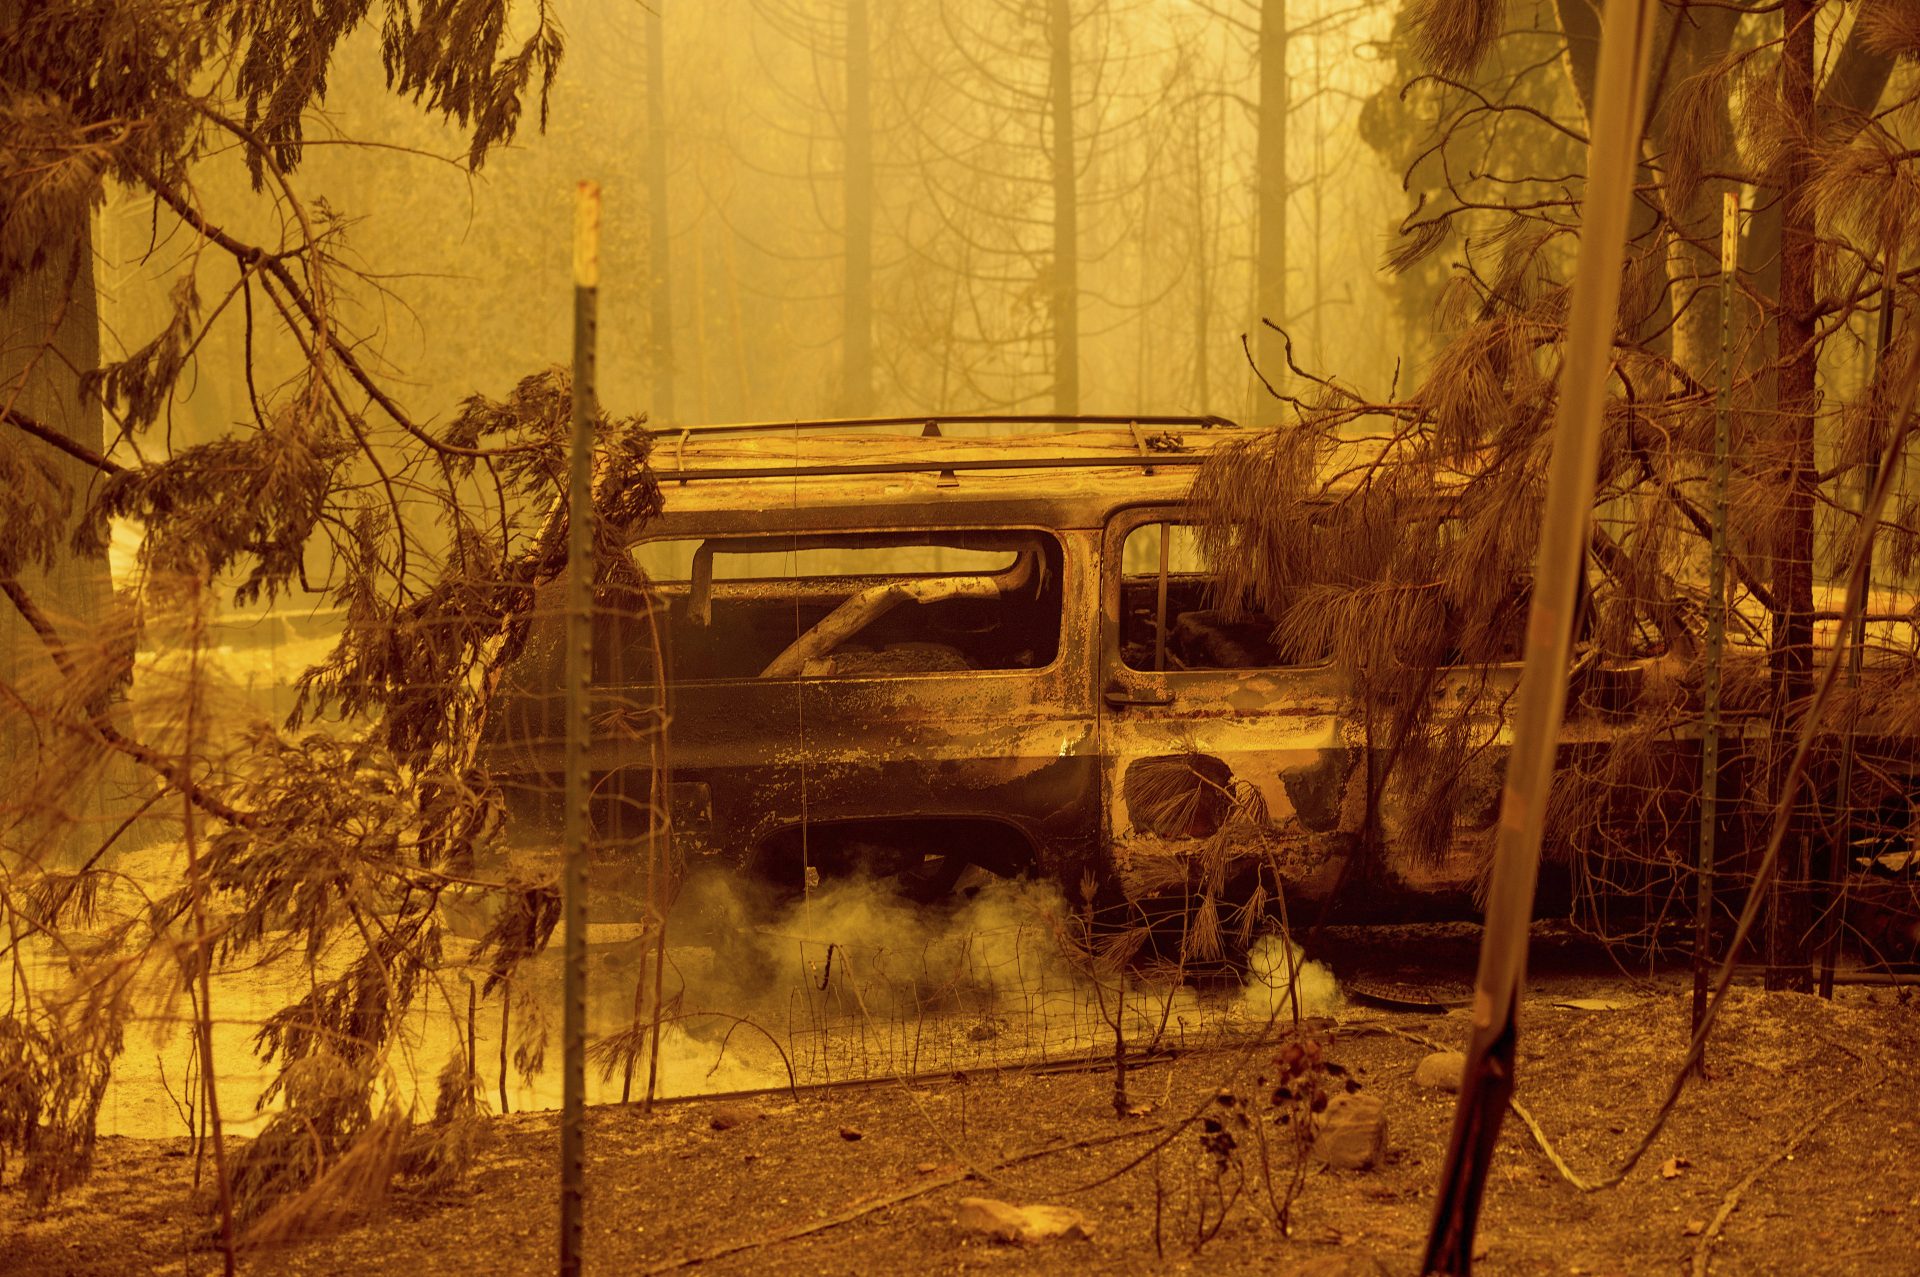 A scorched car rests in a clearing following the Bear Fire in Butte County, Calif., on Wednesday, Sept. 9, 2020. The blaze, part of the lightning-sparked North Complex, expanded at a critical rate of spread as winds buffeted the region.